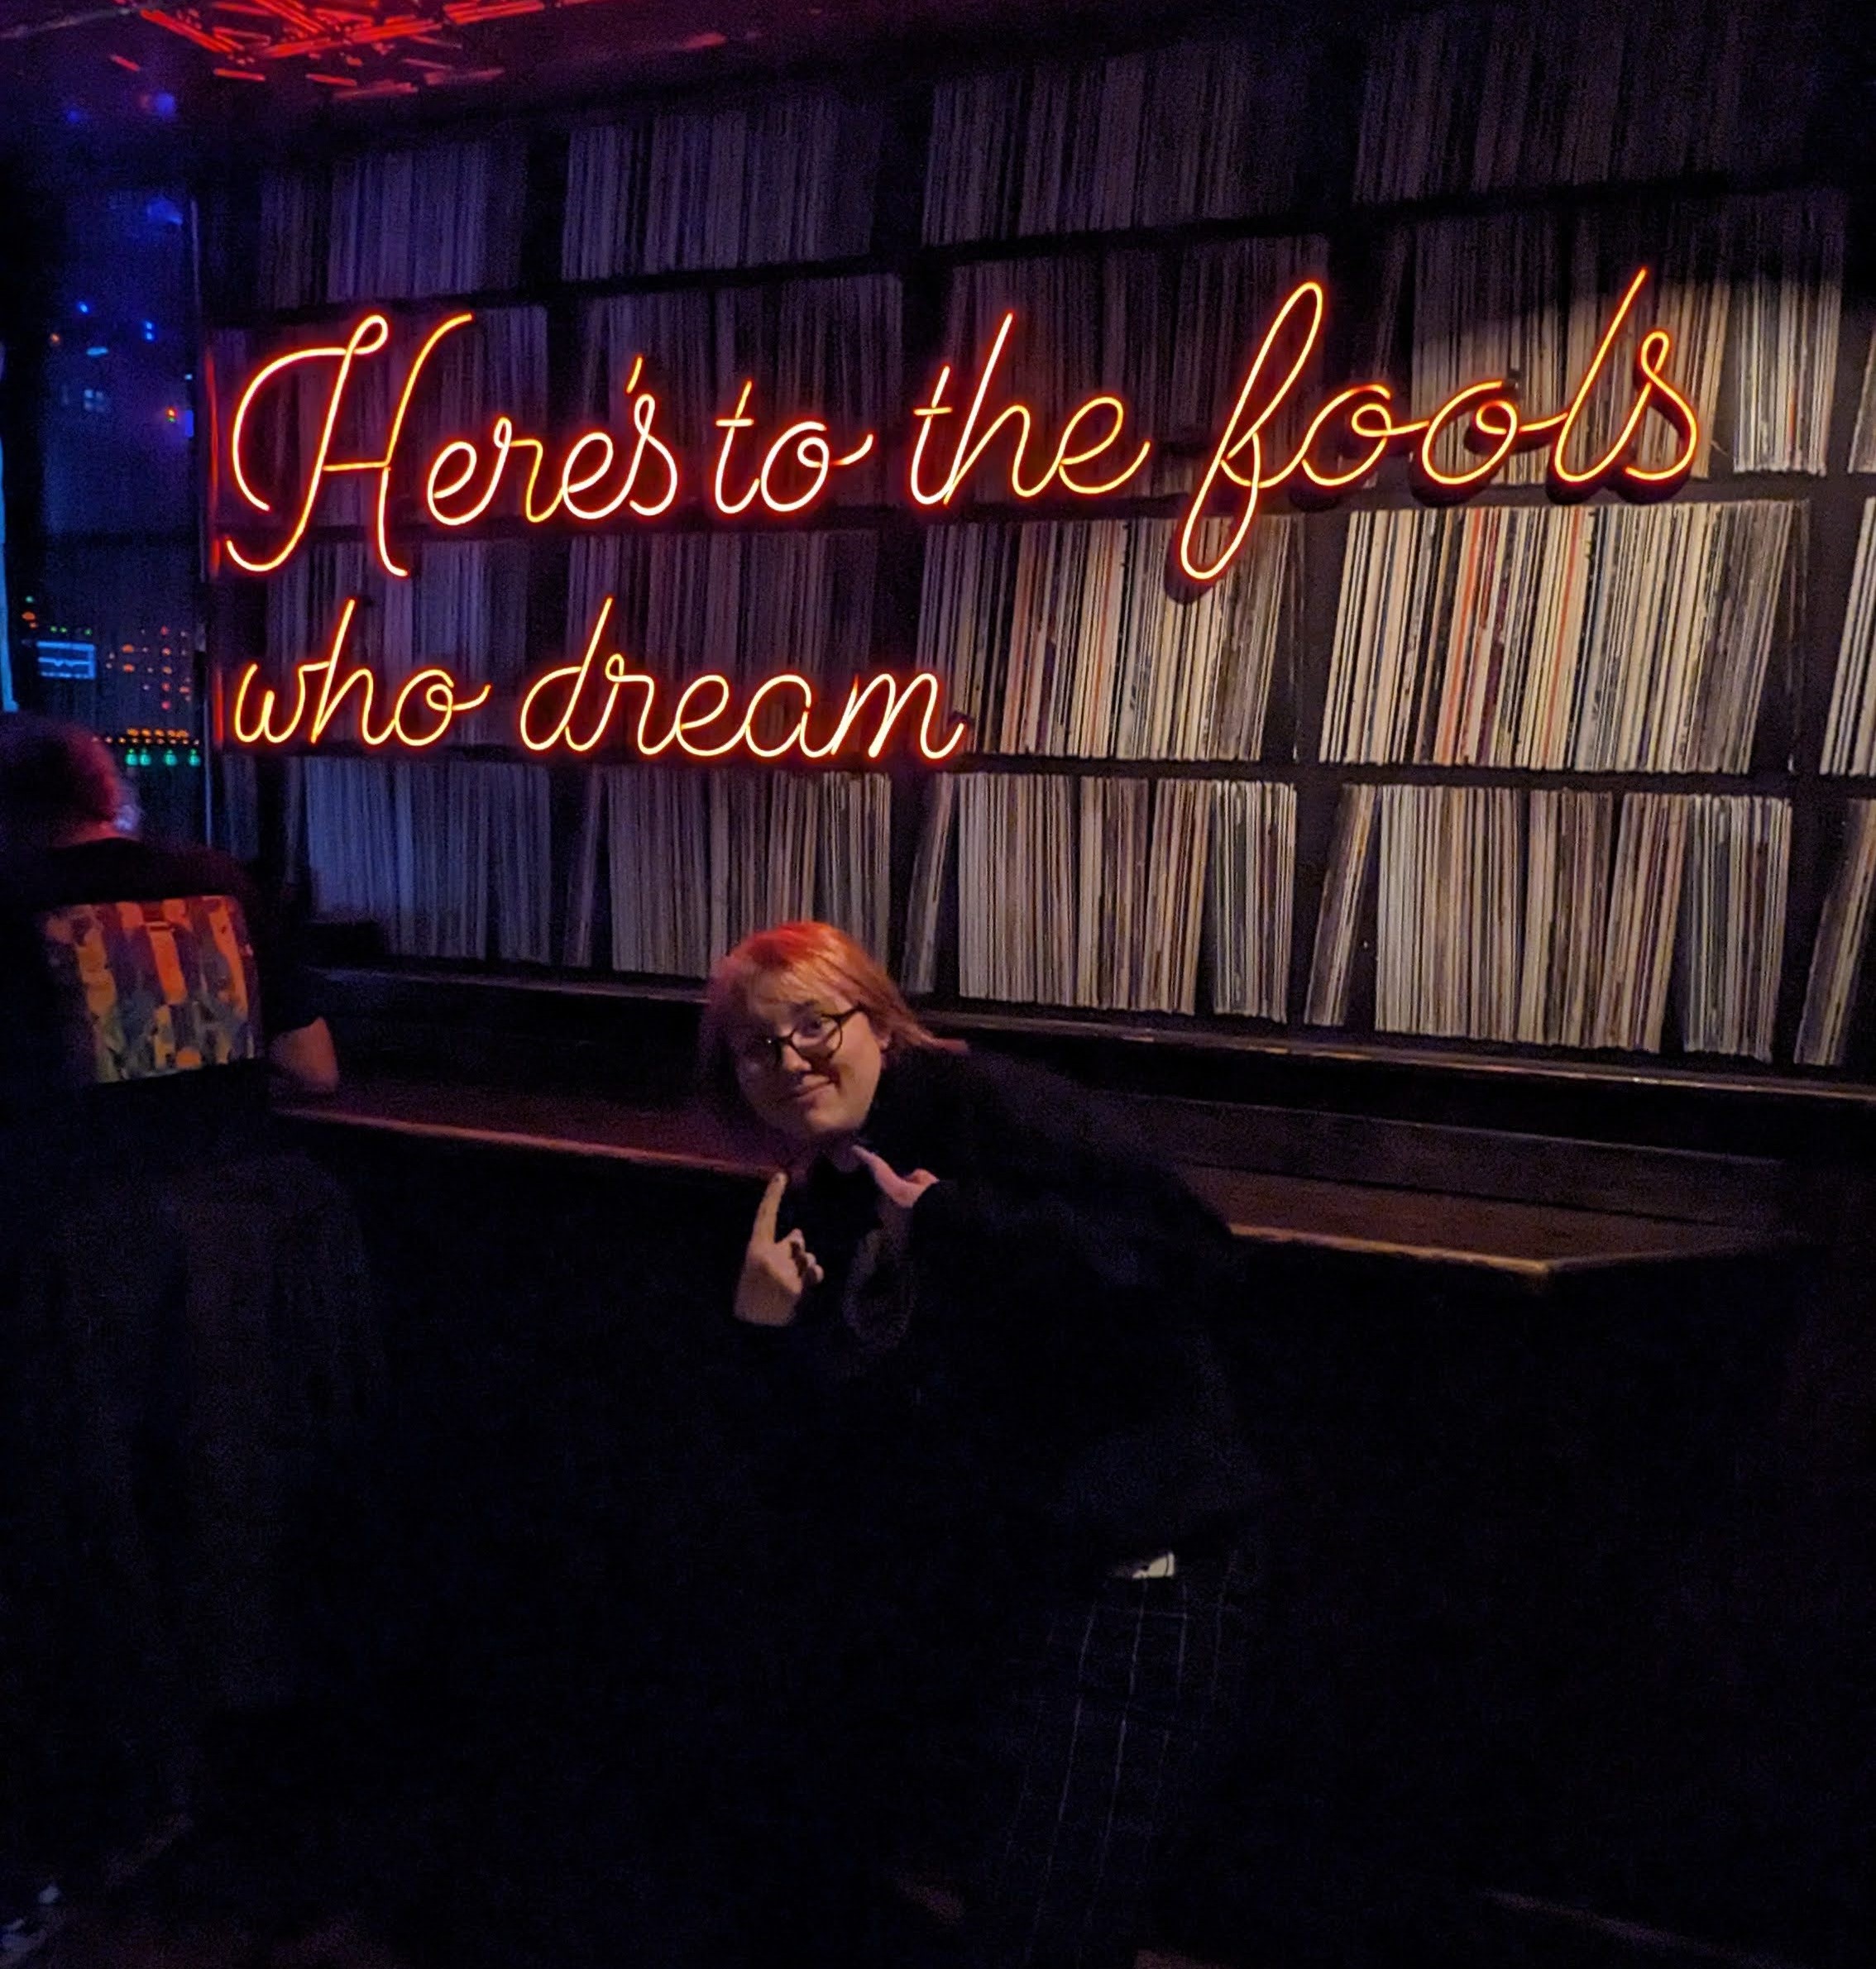 Nico giving a very snazzy thumbs up in front of a neon sign that says "Here's to the fools who dream."